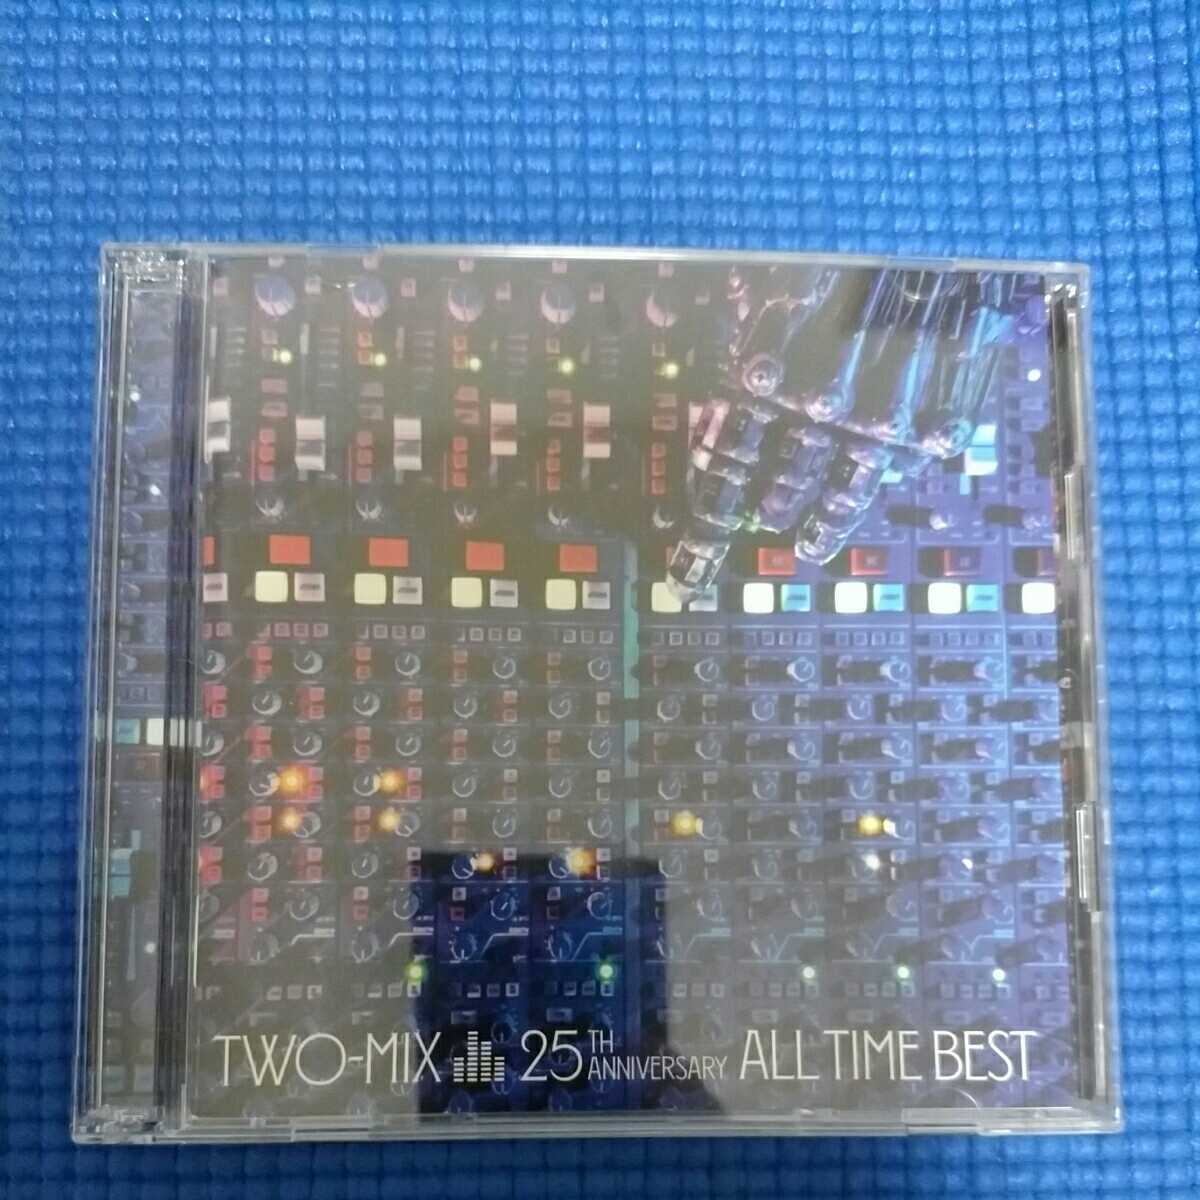 TWO-MIX CD TWO-MIX 25th Anniversary ALL TIME BEST обычный запись 